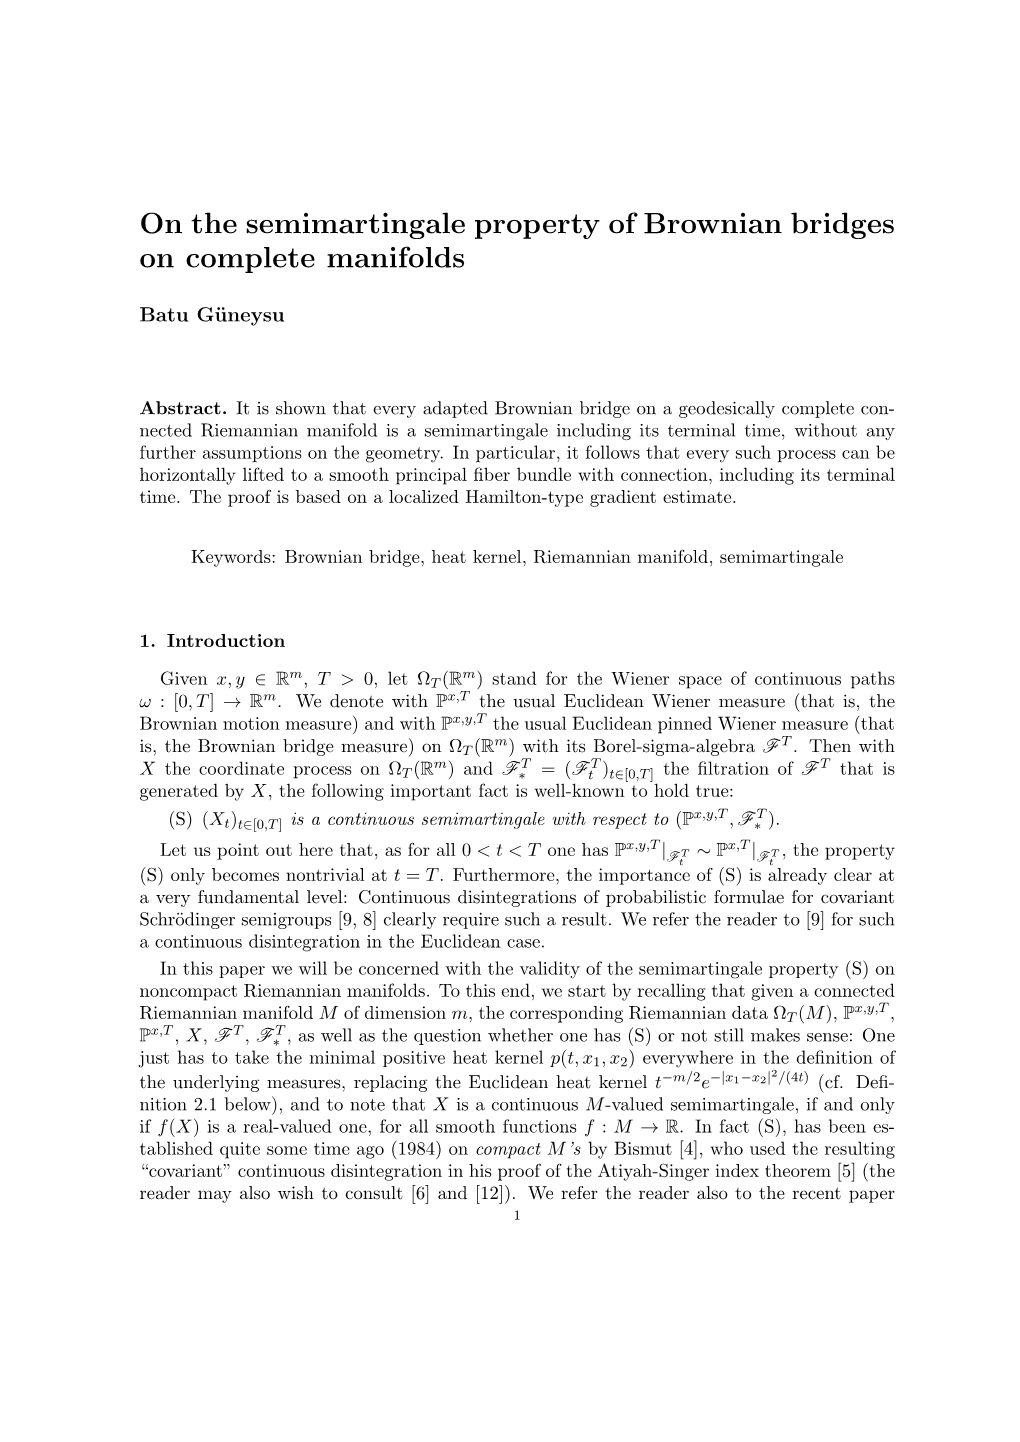 On the Semimartingale Property of Brownian Bridges on Complete Manifolds